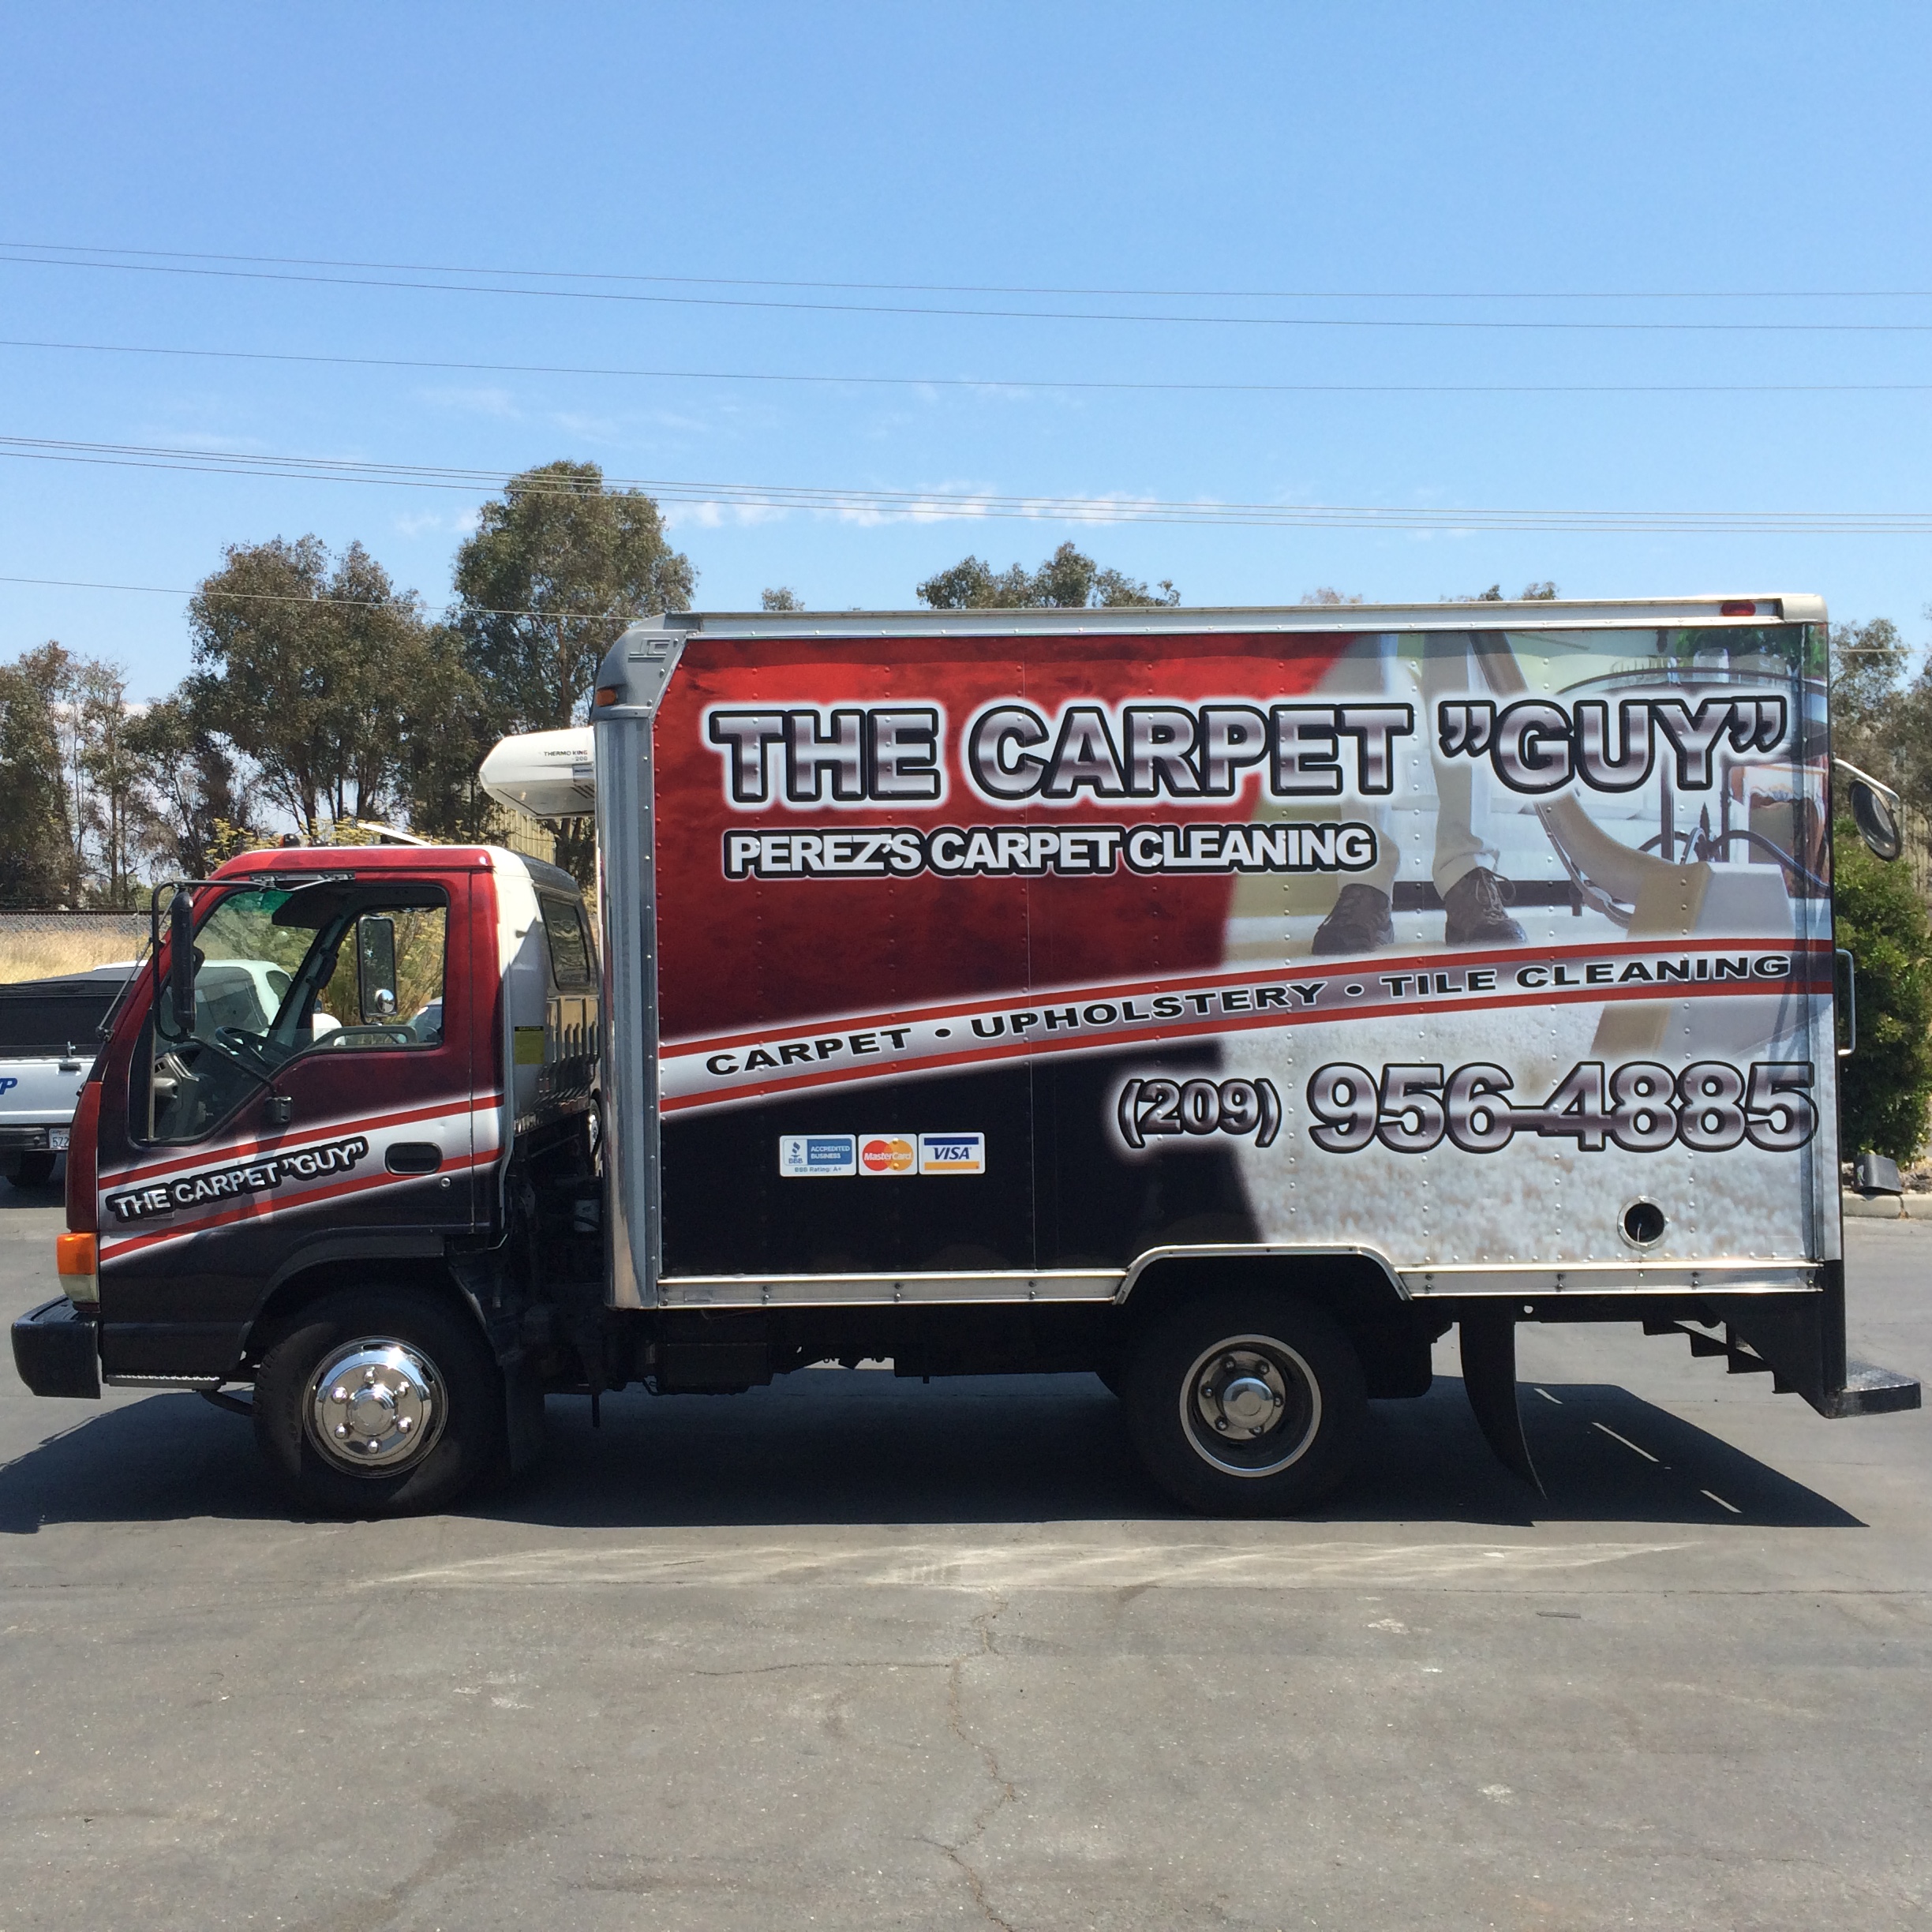 Carpet Cleaning Same Day Service Company